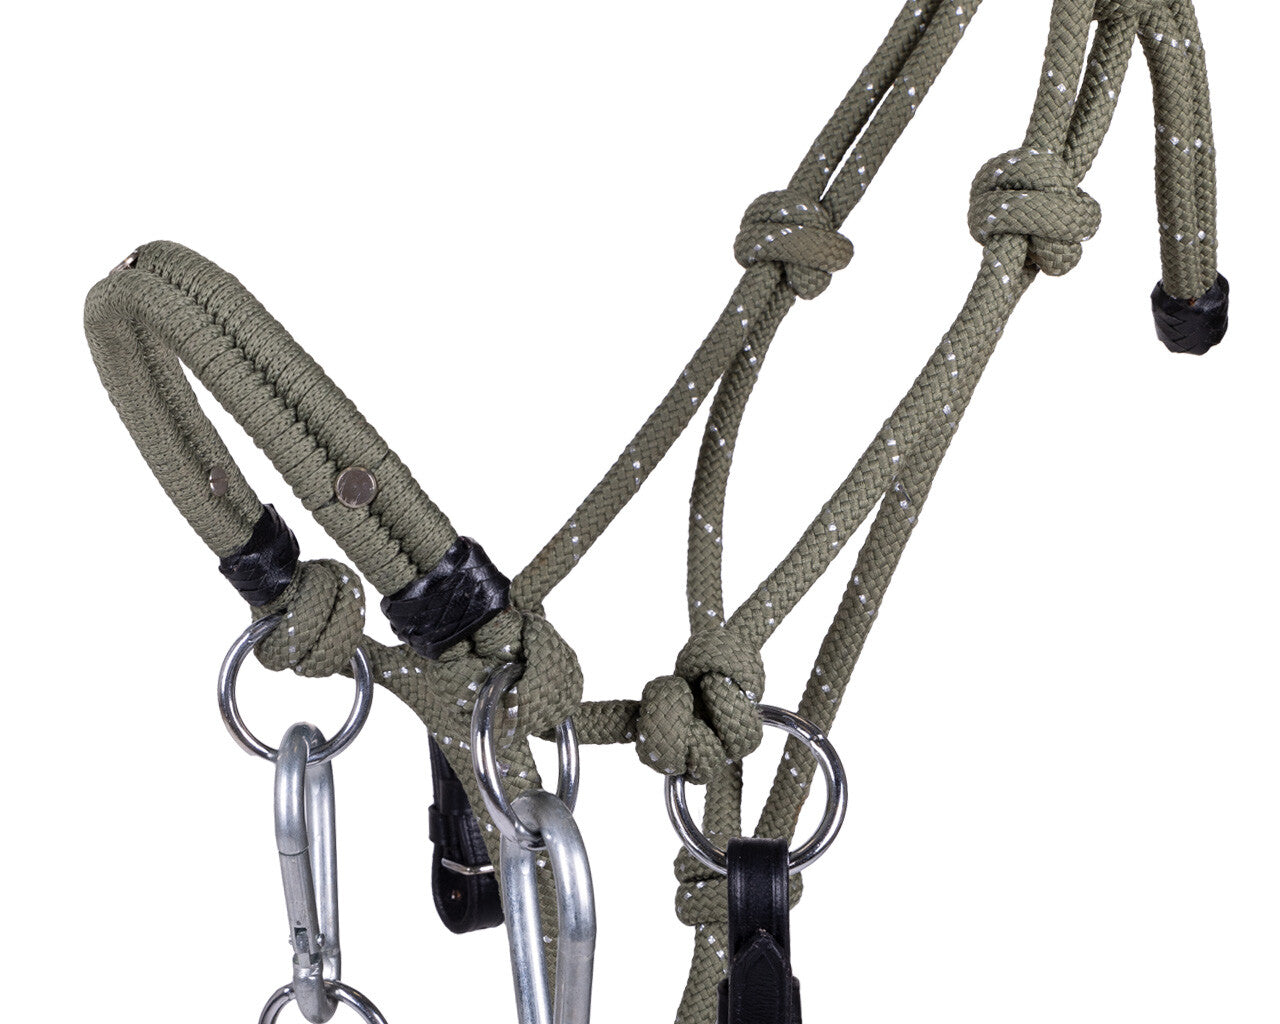 New - Rope halter/bridle